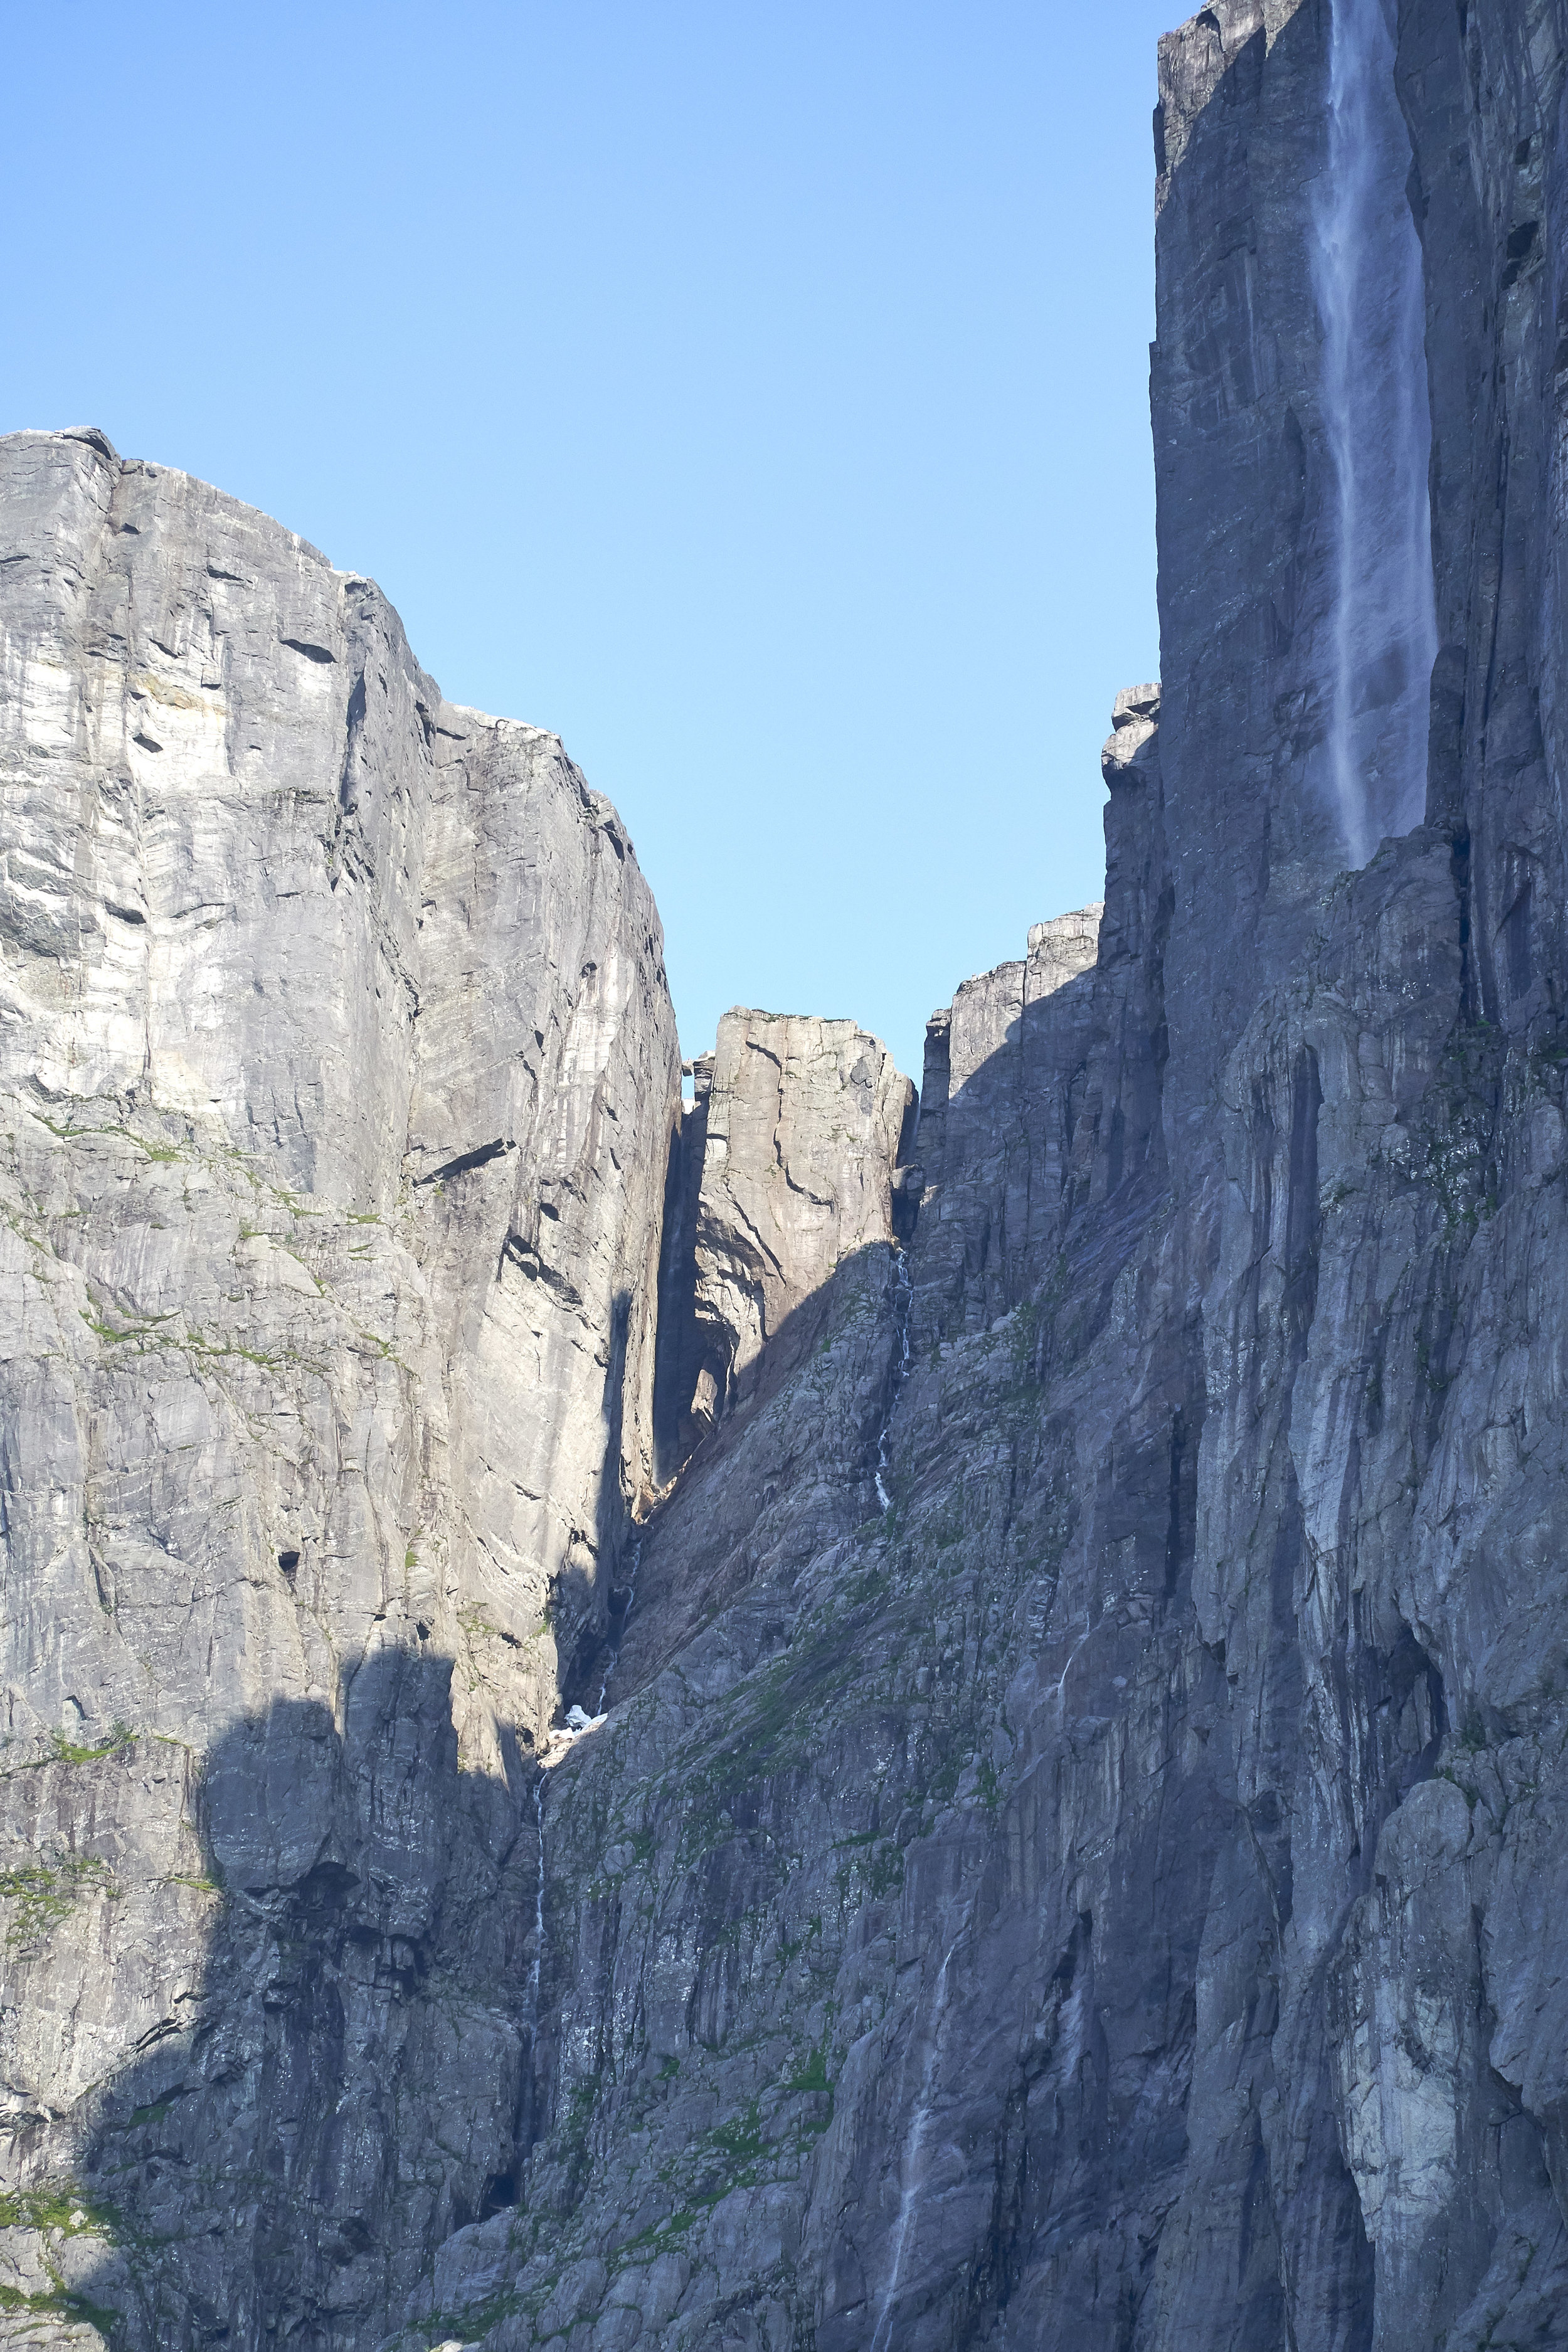  View of Kjerag and Kjeragbolten from the ferry through the fjord 